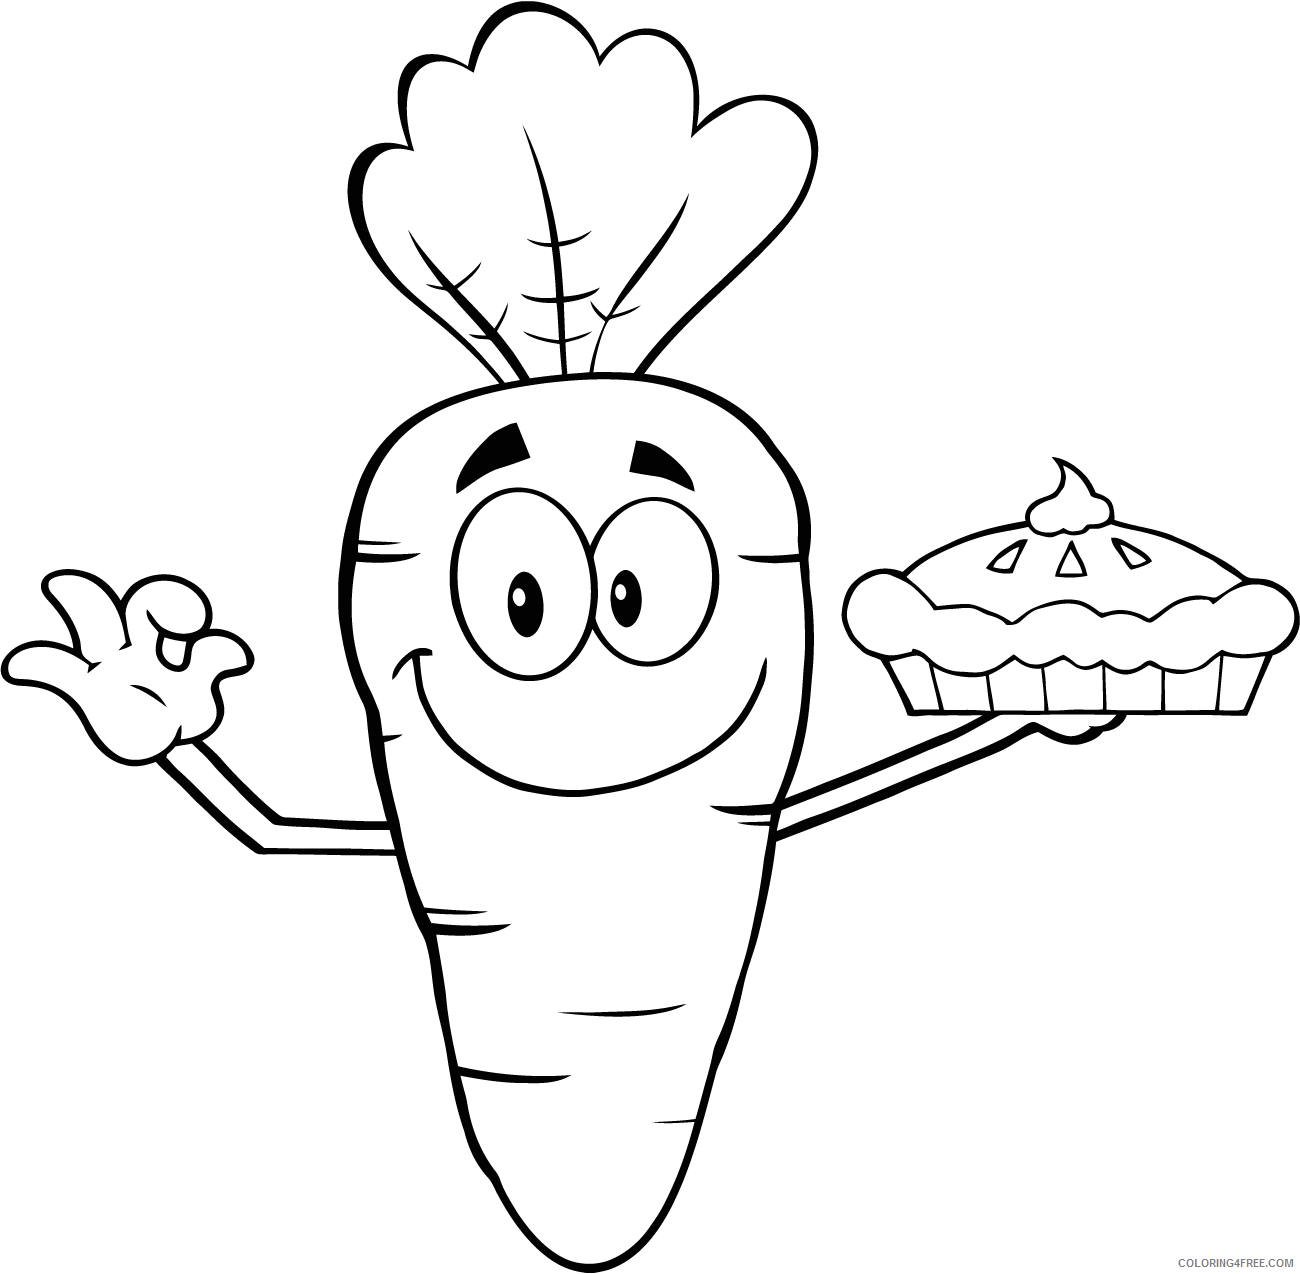 Carrot Coloring Pages Vegetables Food smiling cartoon carrot holding up a pie 2021 Coloring4free